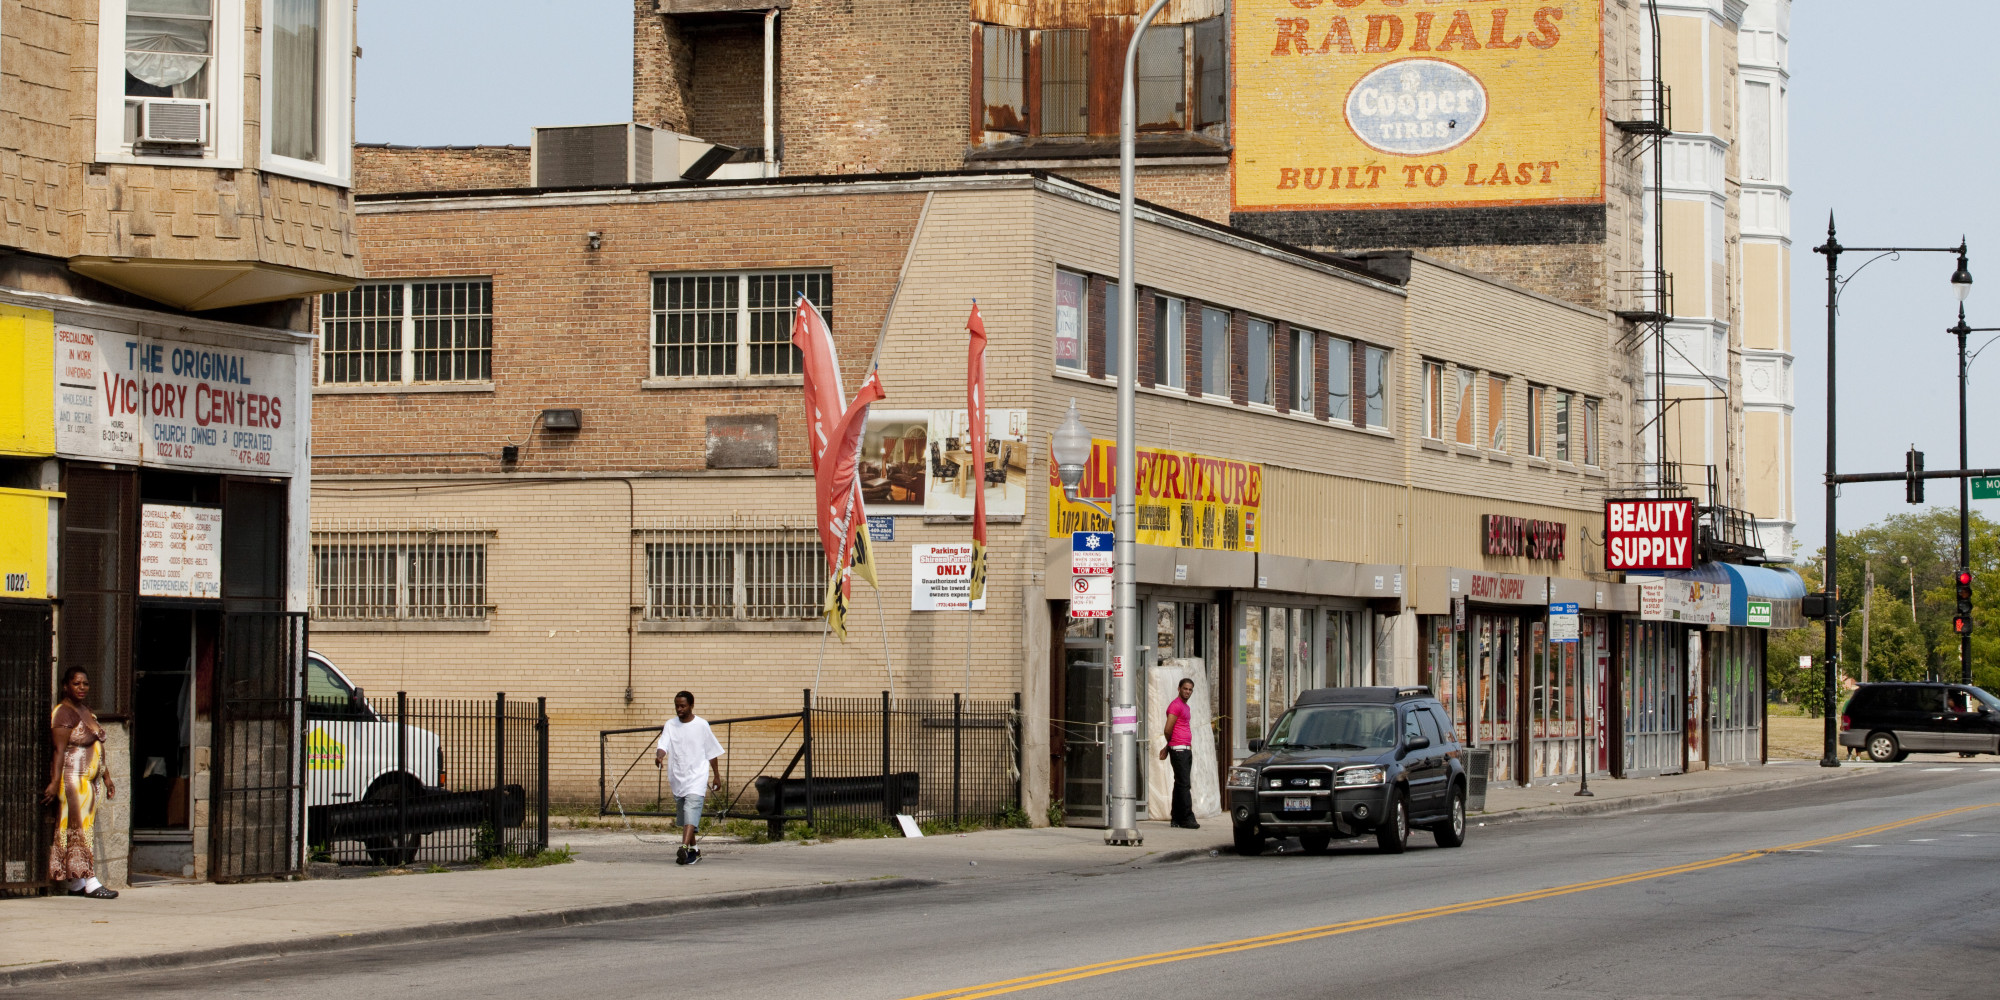 CHICAGO, IL - AUGUST 19: People walk through a commercial area in the Englewood neighborhood, on August 19, 2013 in Chicago, Illinois. Englewood is a depressed neighborhood of Chicago with a high crime rate that has been hit even harder by the sluggish economy. Some people are moving out to the suburbs to escape the violence. (Photo by Melanie Stetson Freeman/The Christian Science Monitor via Getty Images)